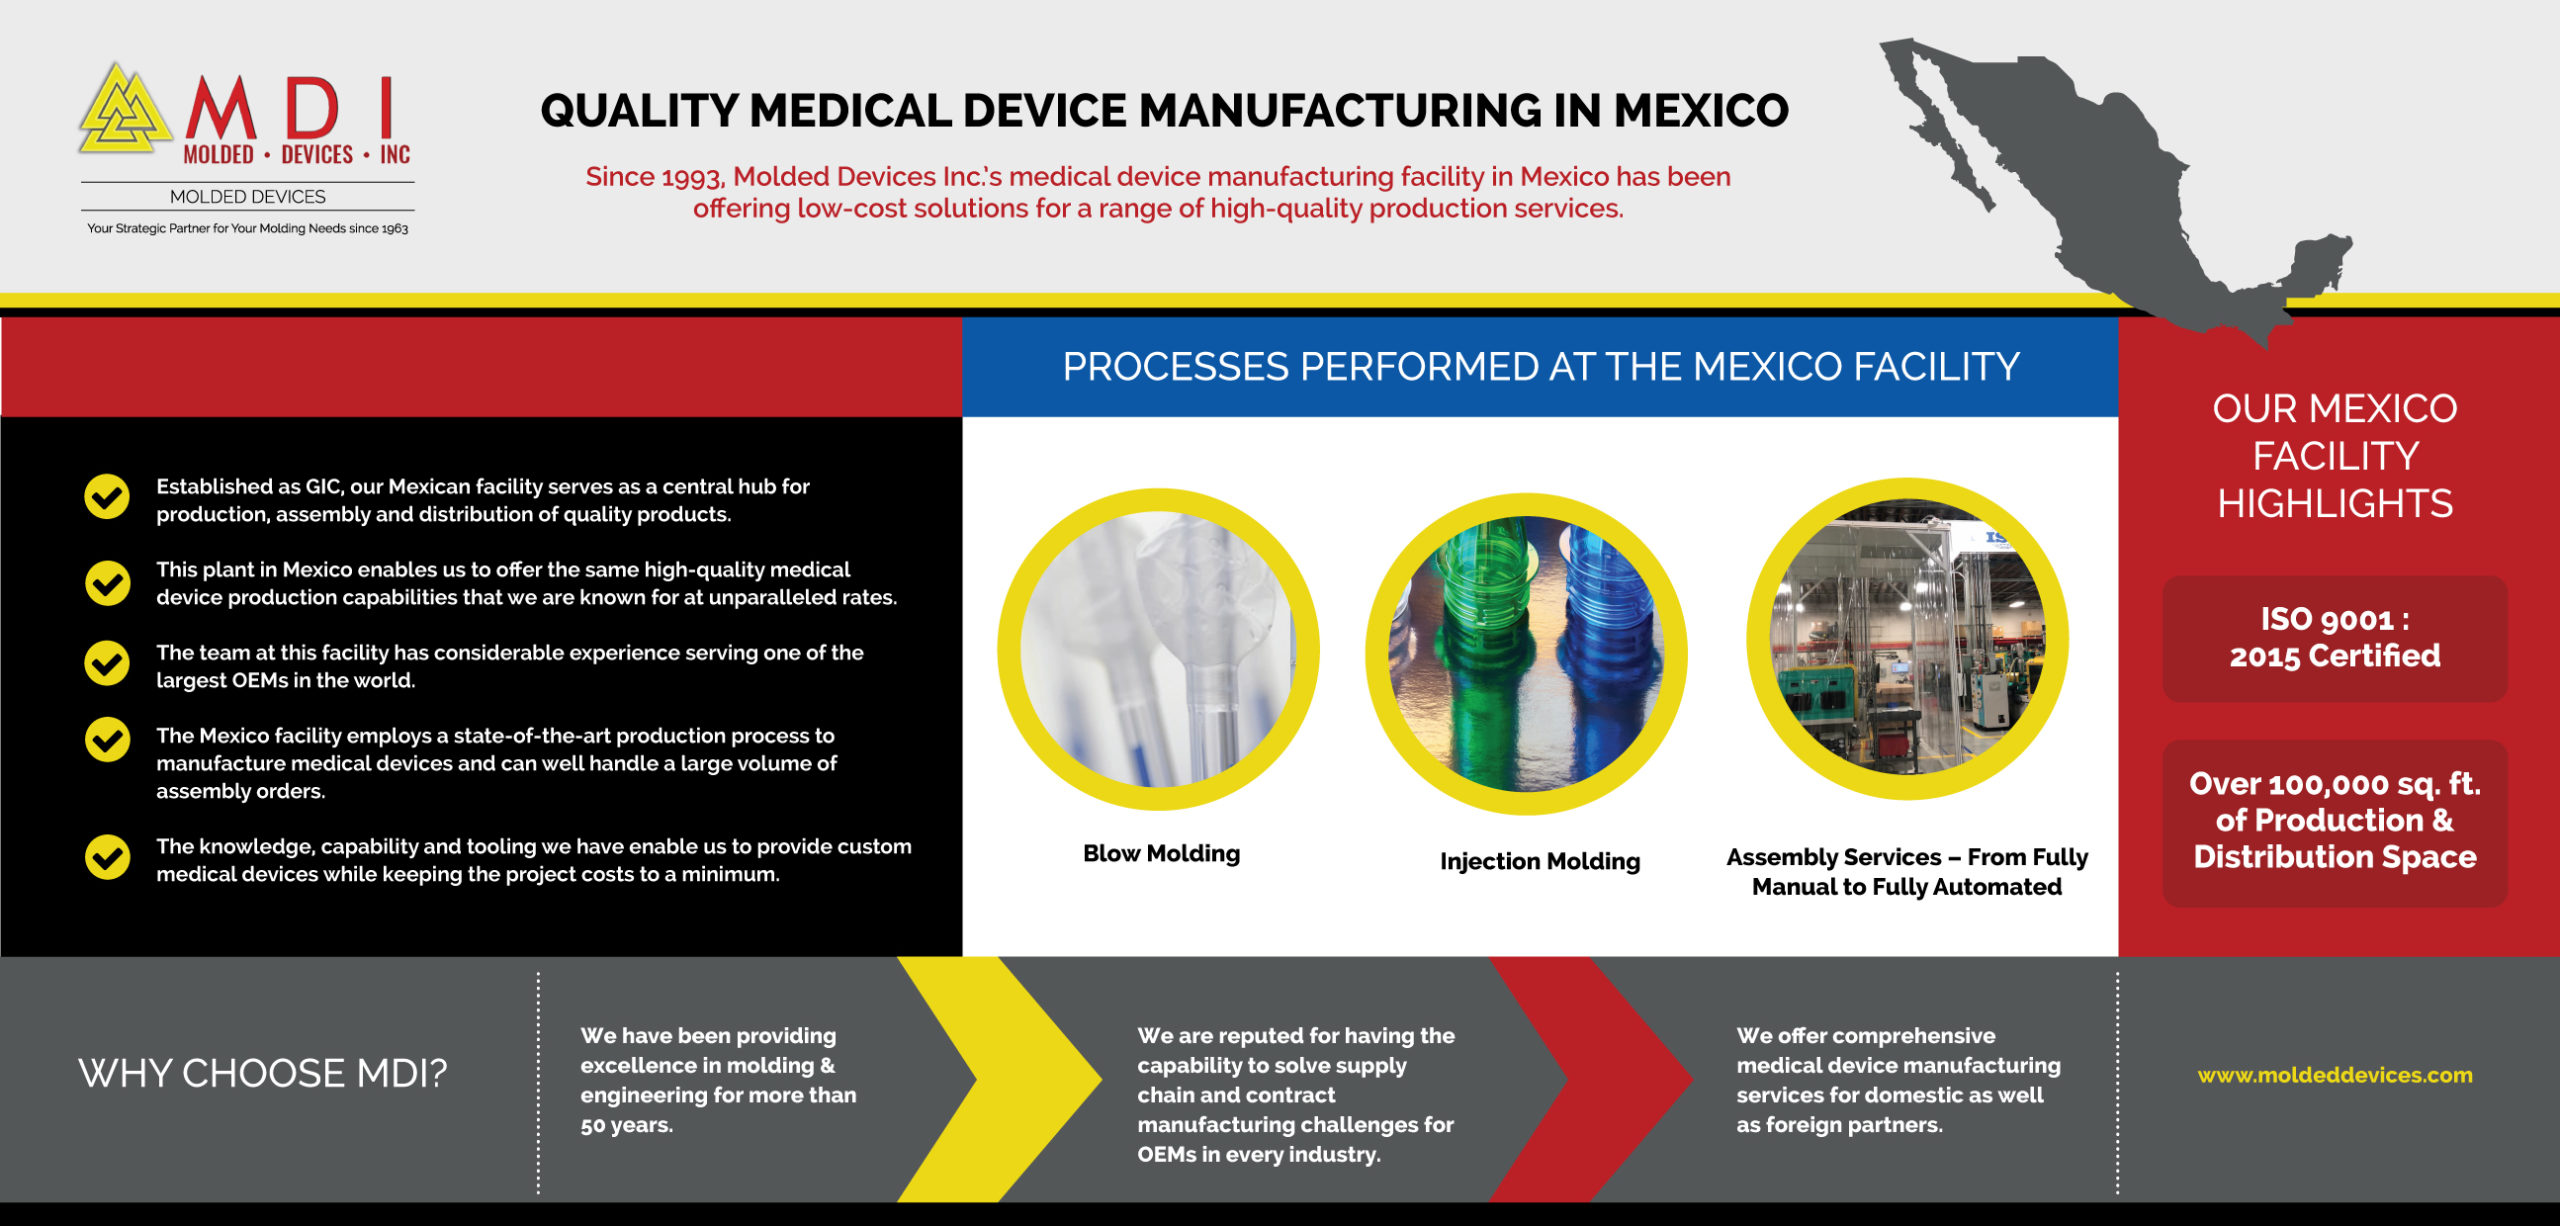 Quality Medical Device Manufacturing in Mexico